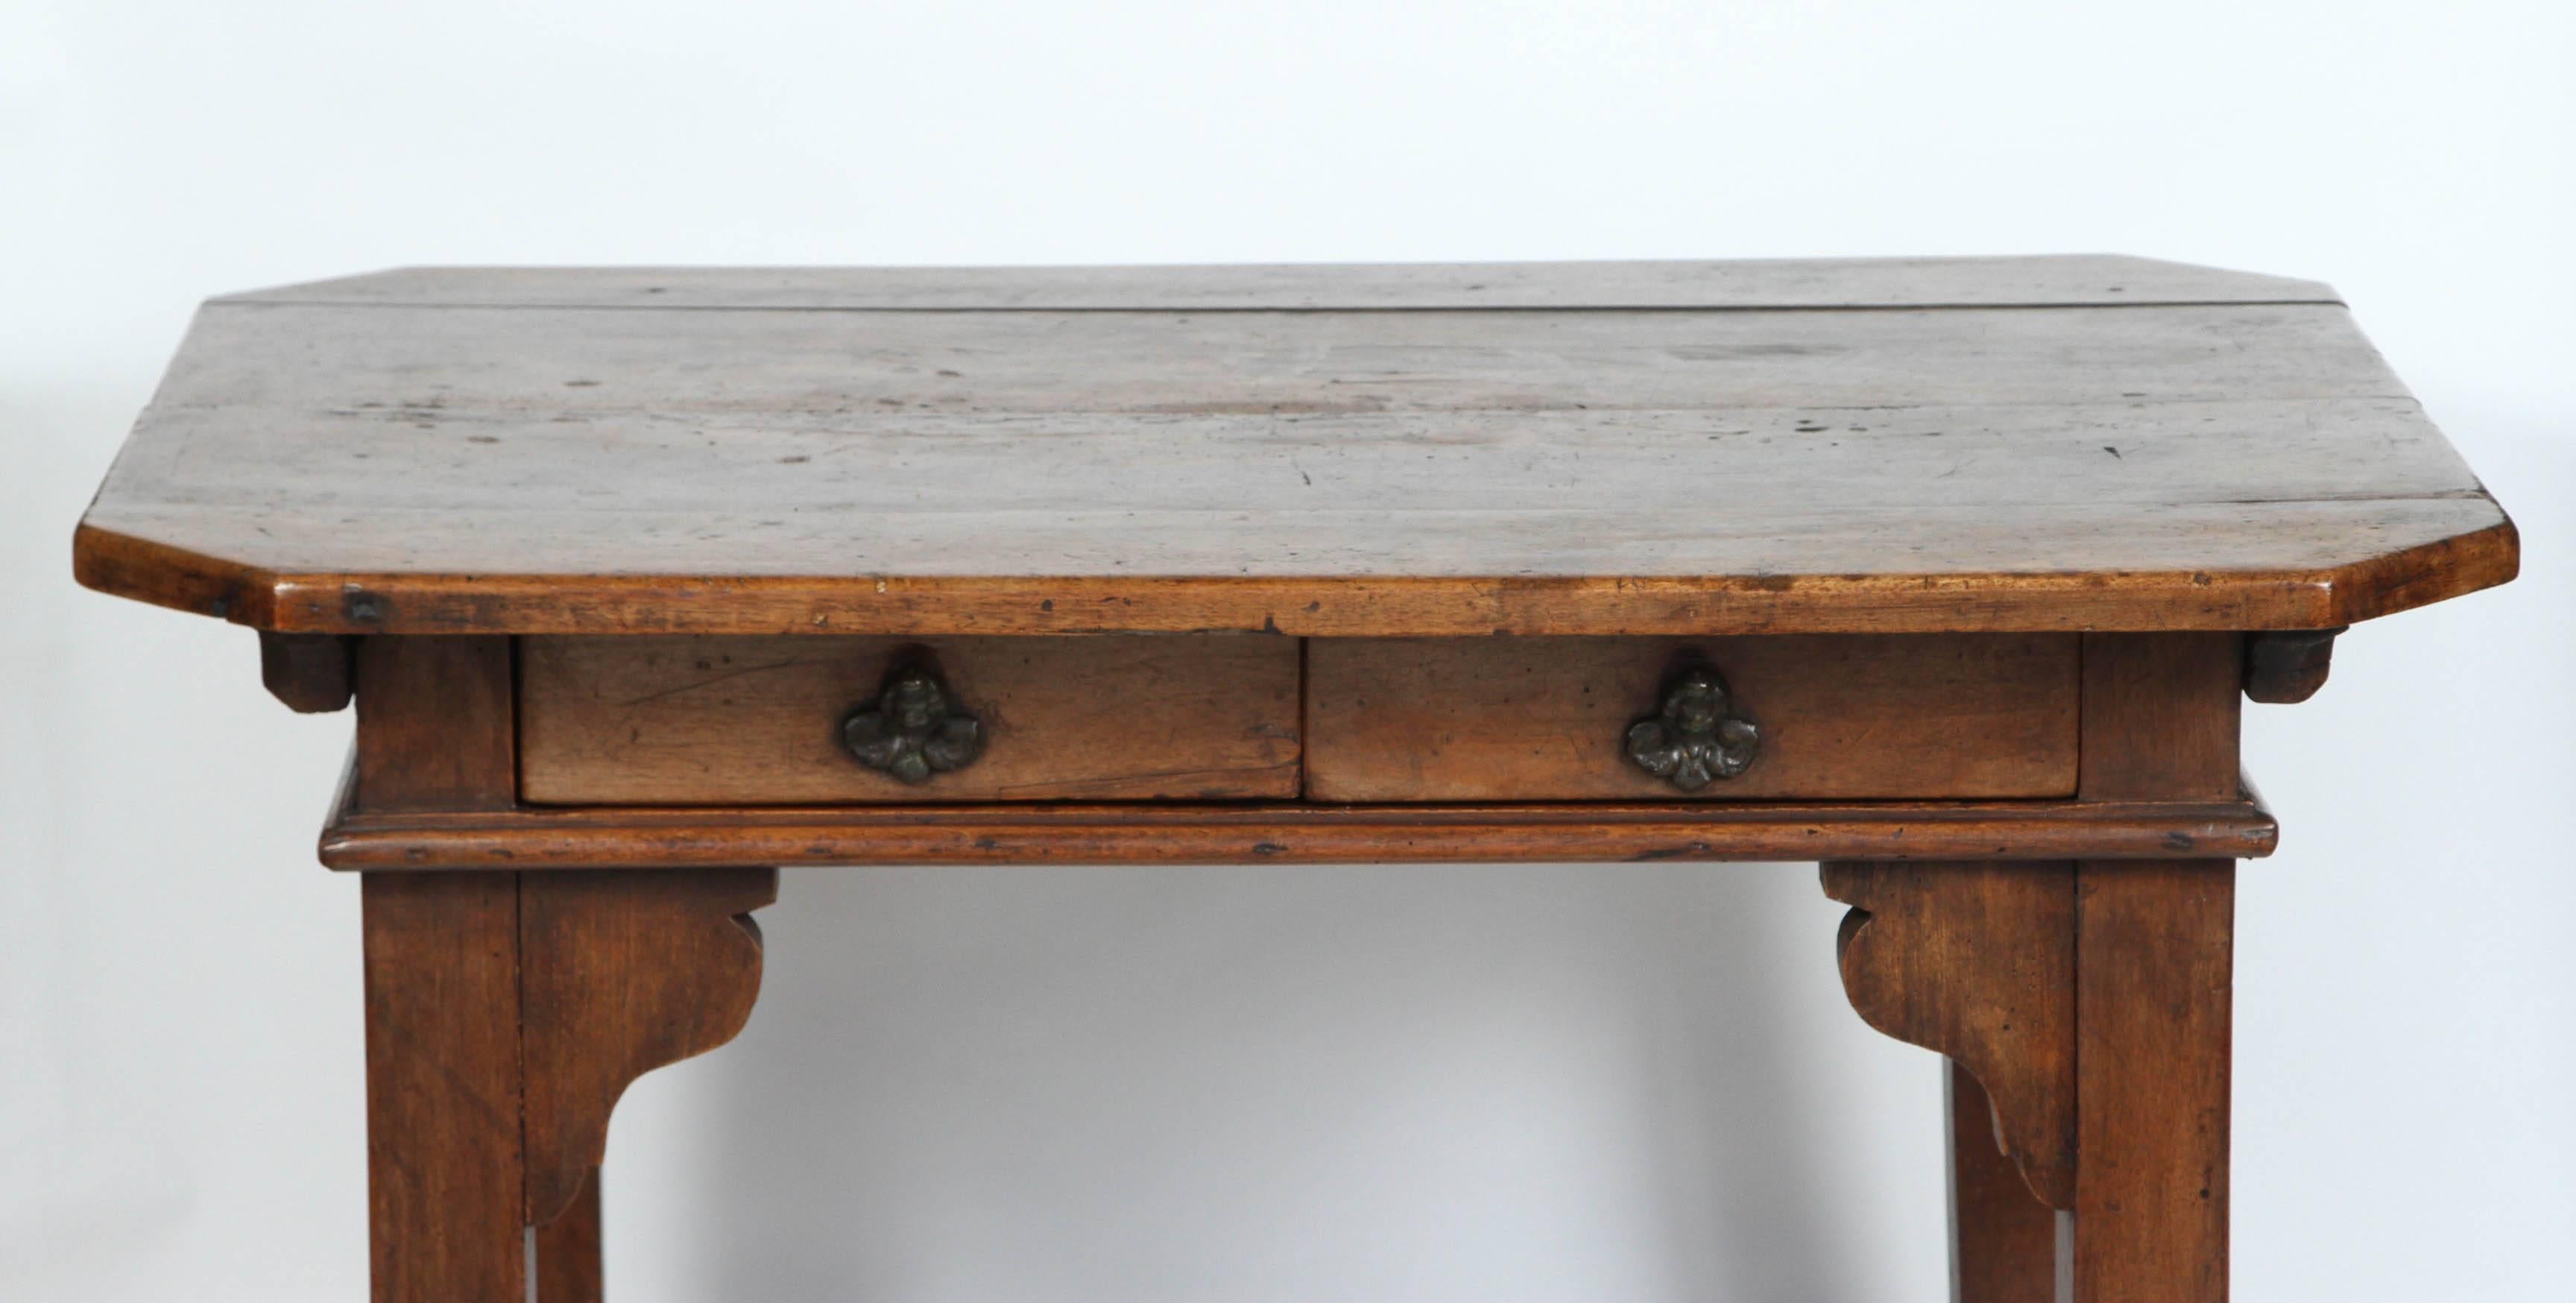 An 18th century Spanish walnut stretchered table with two drawers, circa 1770. The patina is rich and luminous. The drawer hardware are charming putti heads.  This piece can serve as an excellent side table, sofa table or console.